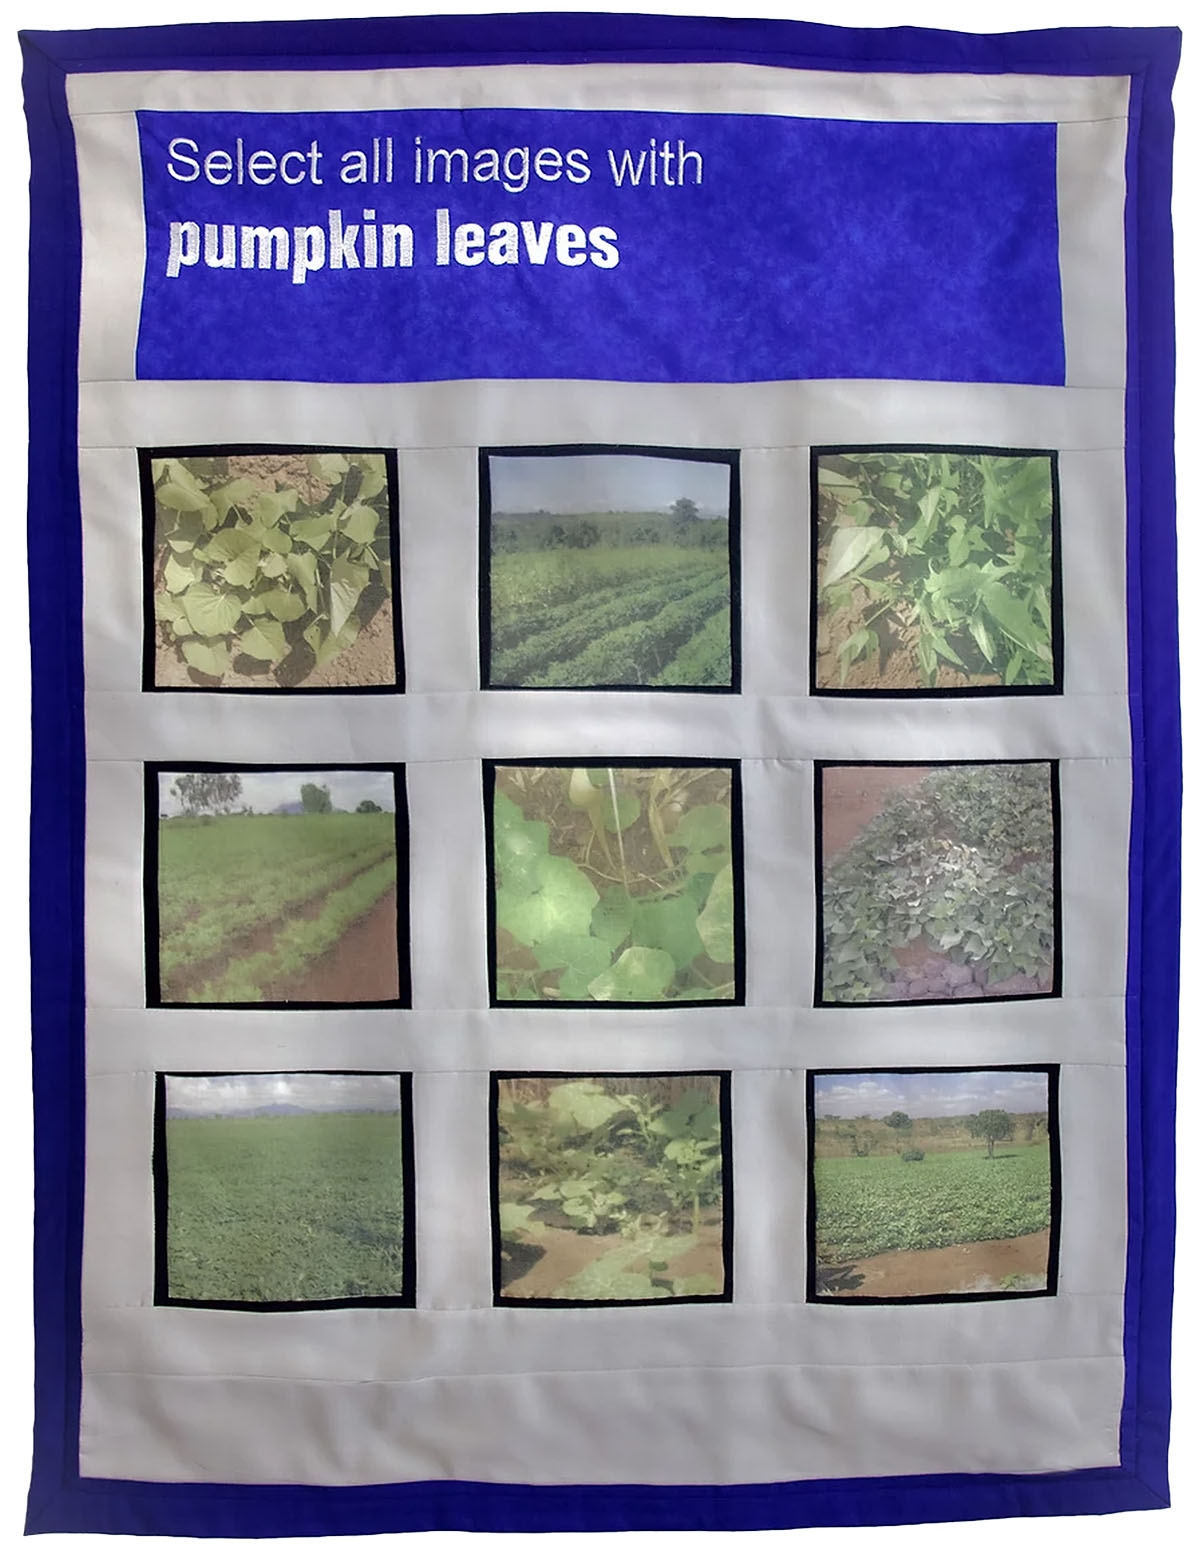 Quilt with square images of gardens. Text on it asks the viewer to select all images with pumpkin leaves.